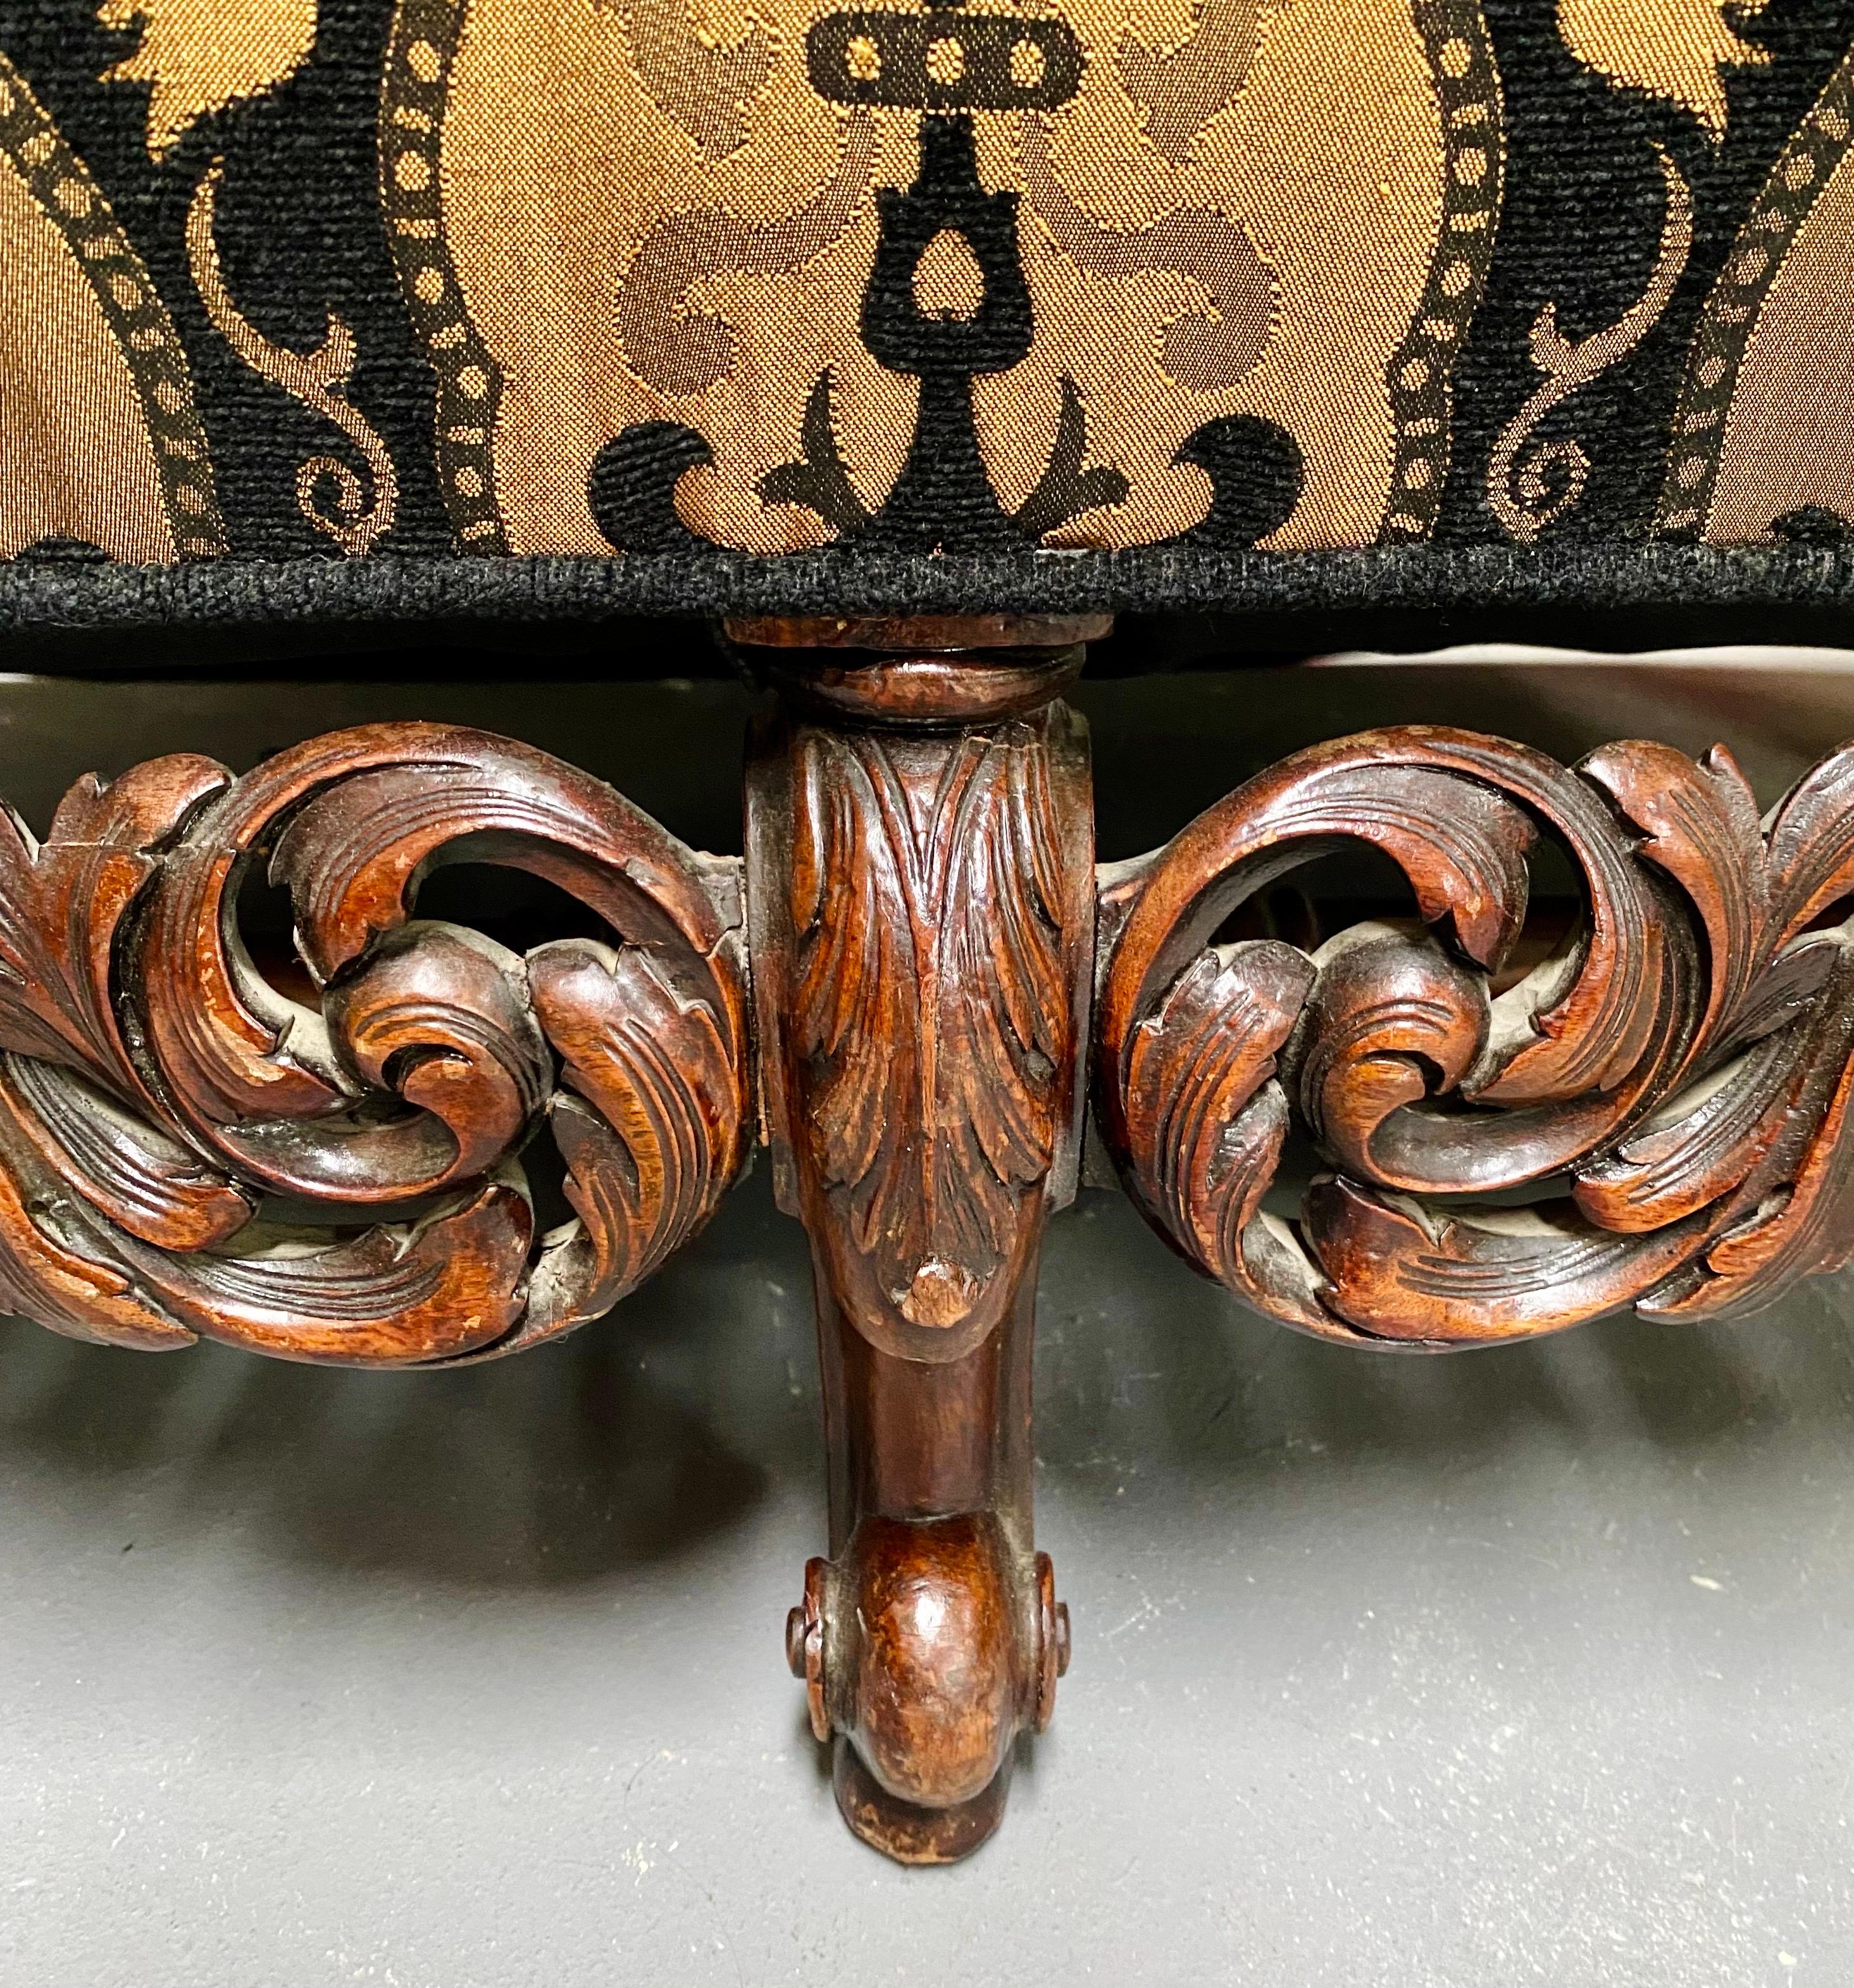 Italian Rococo Revival Style Settee or Sofa with Heraldic Motif in Black & Beige For Sale 2